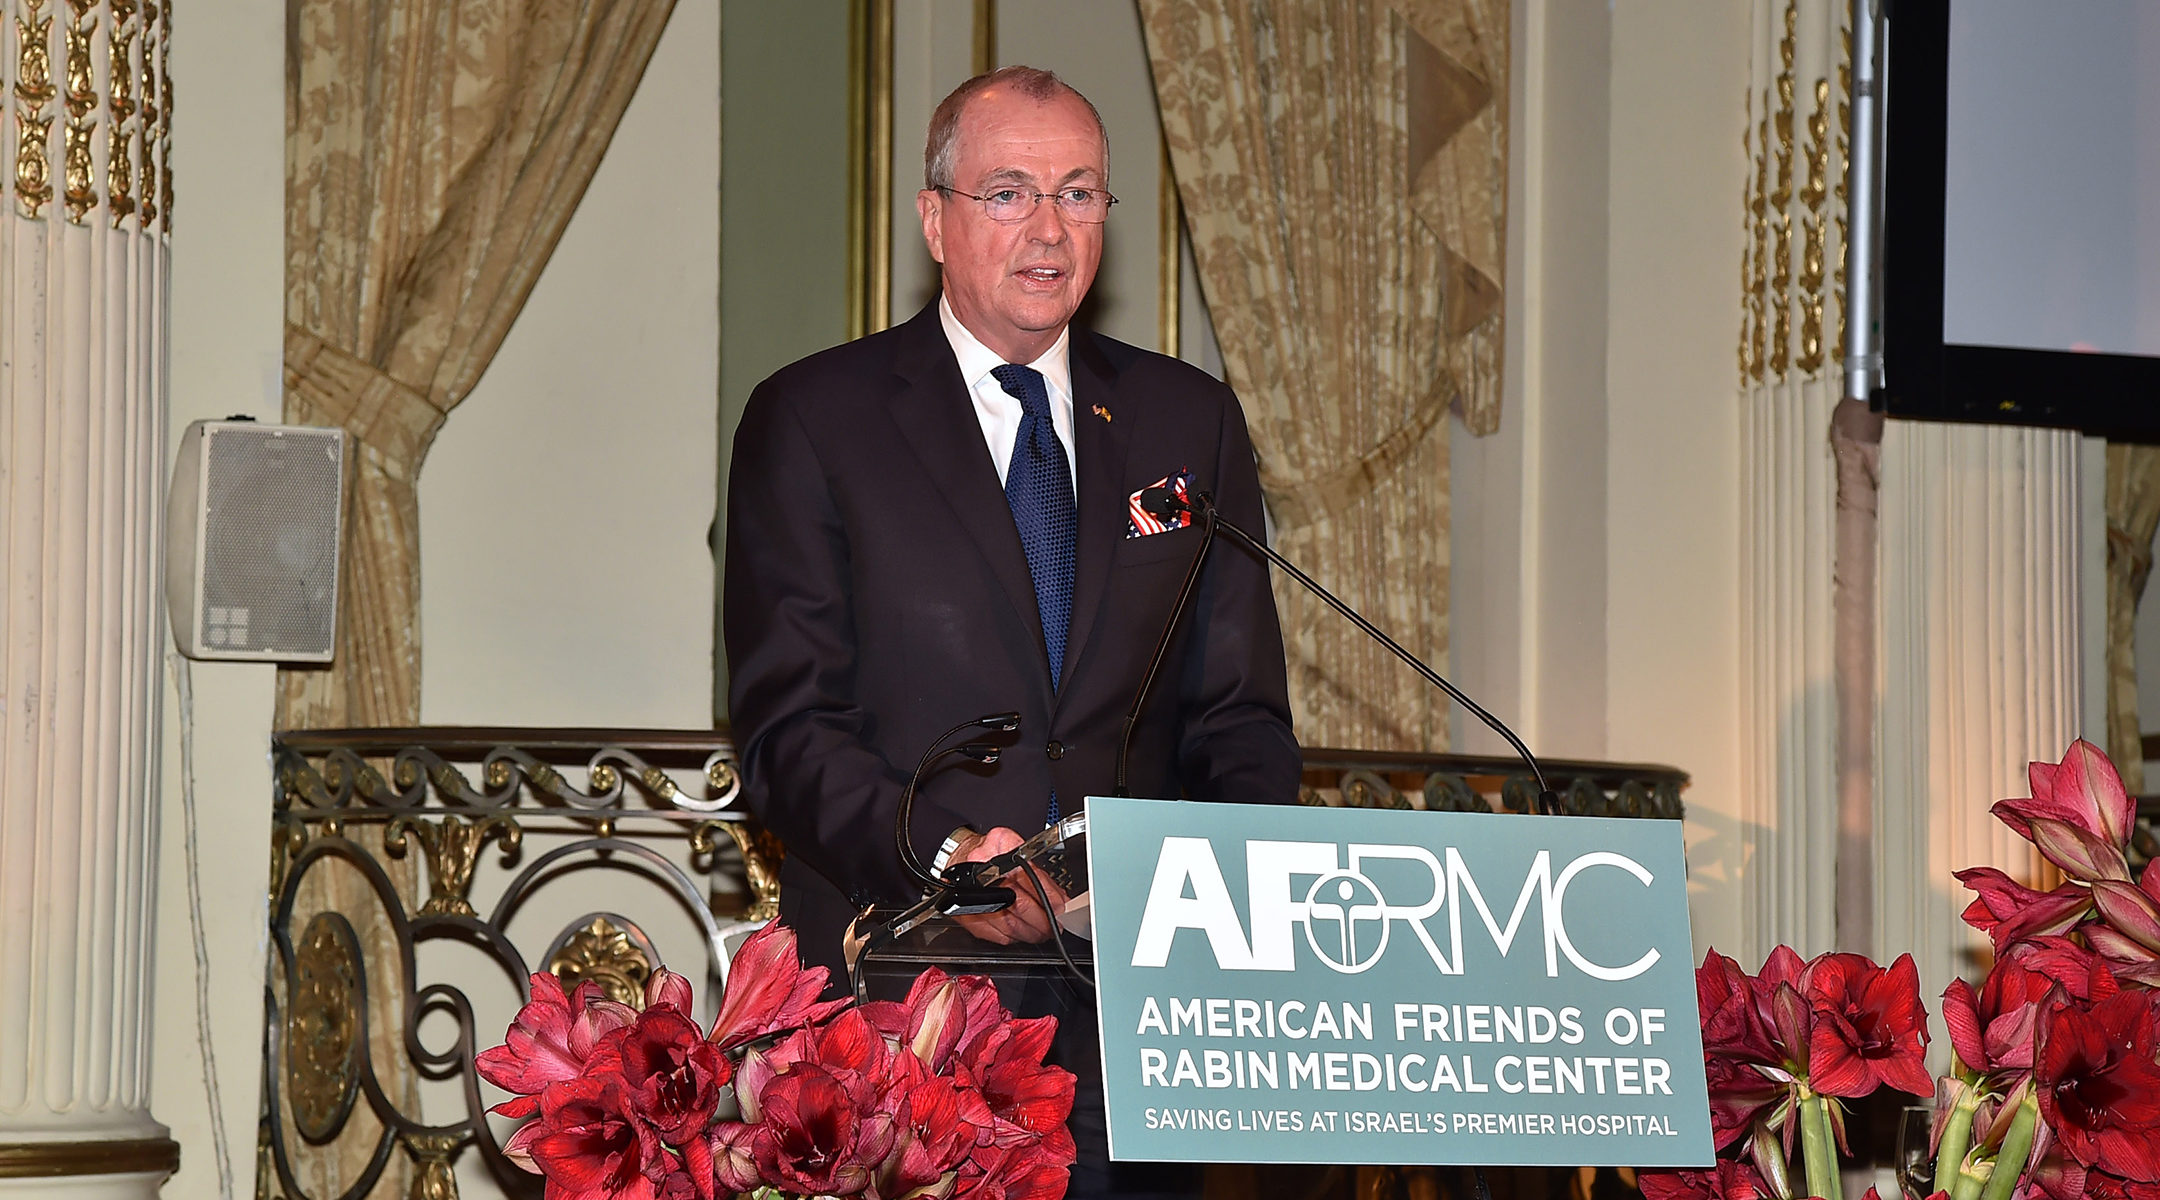 New Jersey Governor Phil Murphy speaking at American Friends Of Rabin Medical Center 2019 Gala at The Plaza Hotel on November 11, 2019 in New York City. (Patrick McMullan via Getty Images)